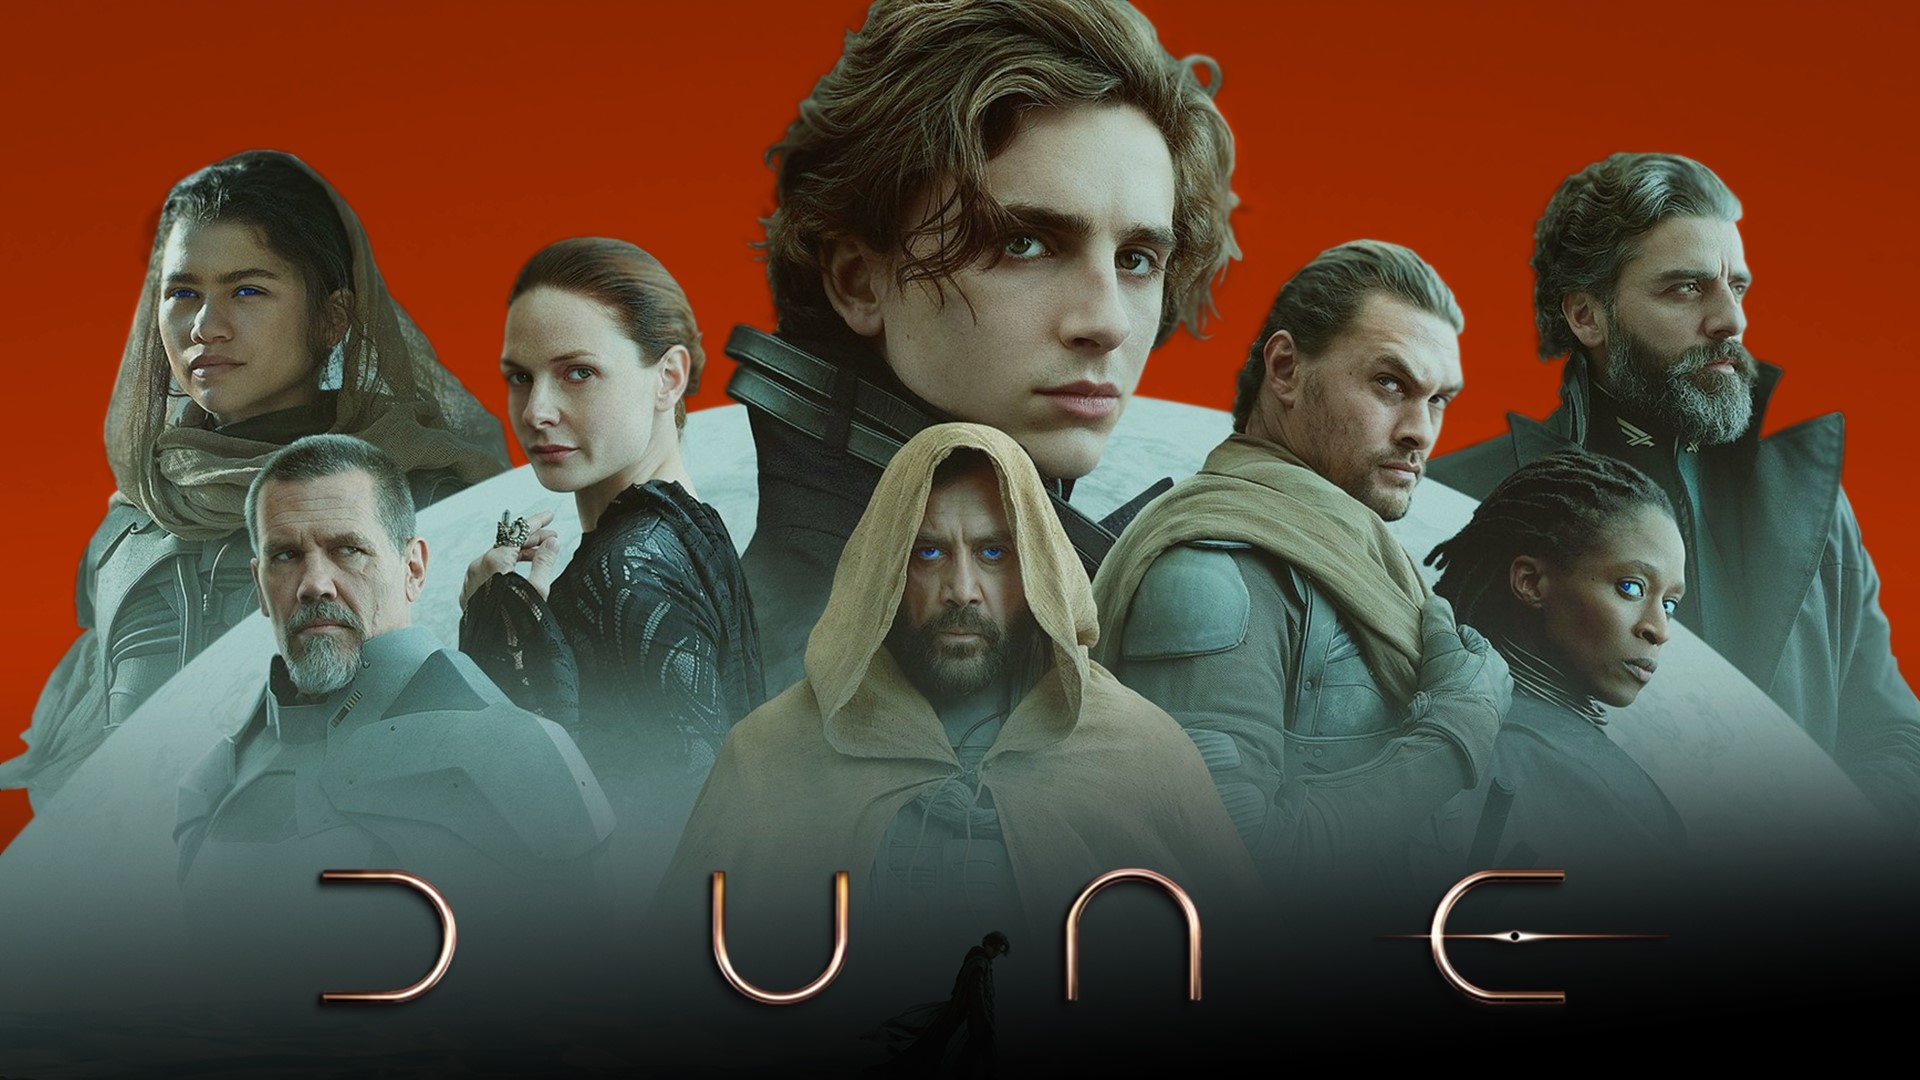 Dune not only lives up to the hype that has come before it, but manages to be exactly the sci-fi epic the film world was needing.